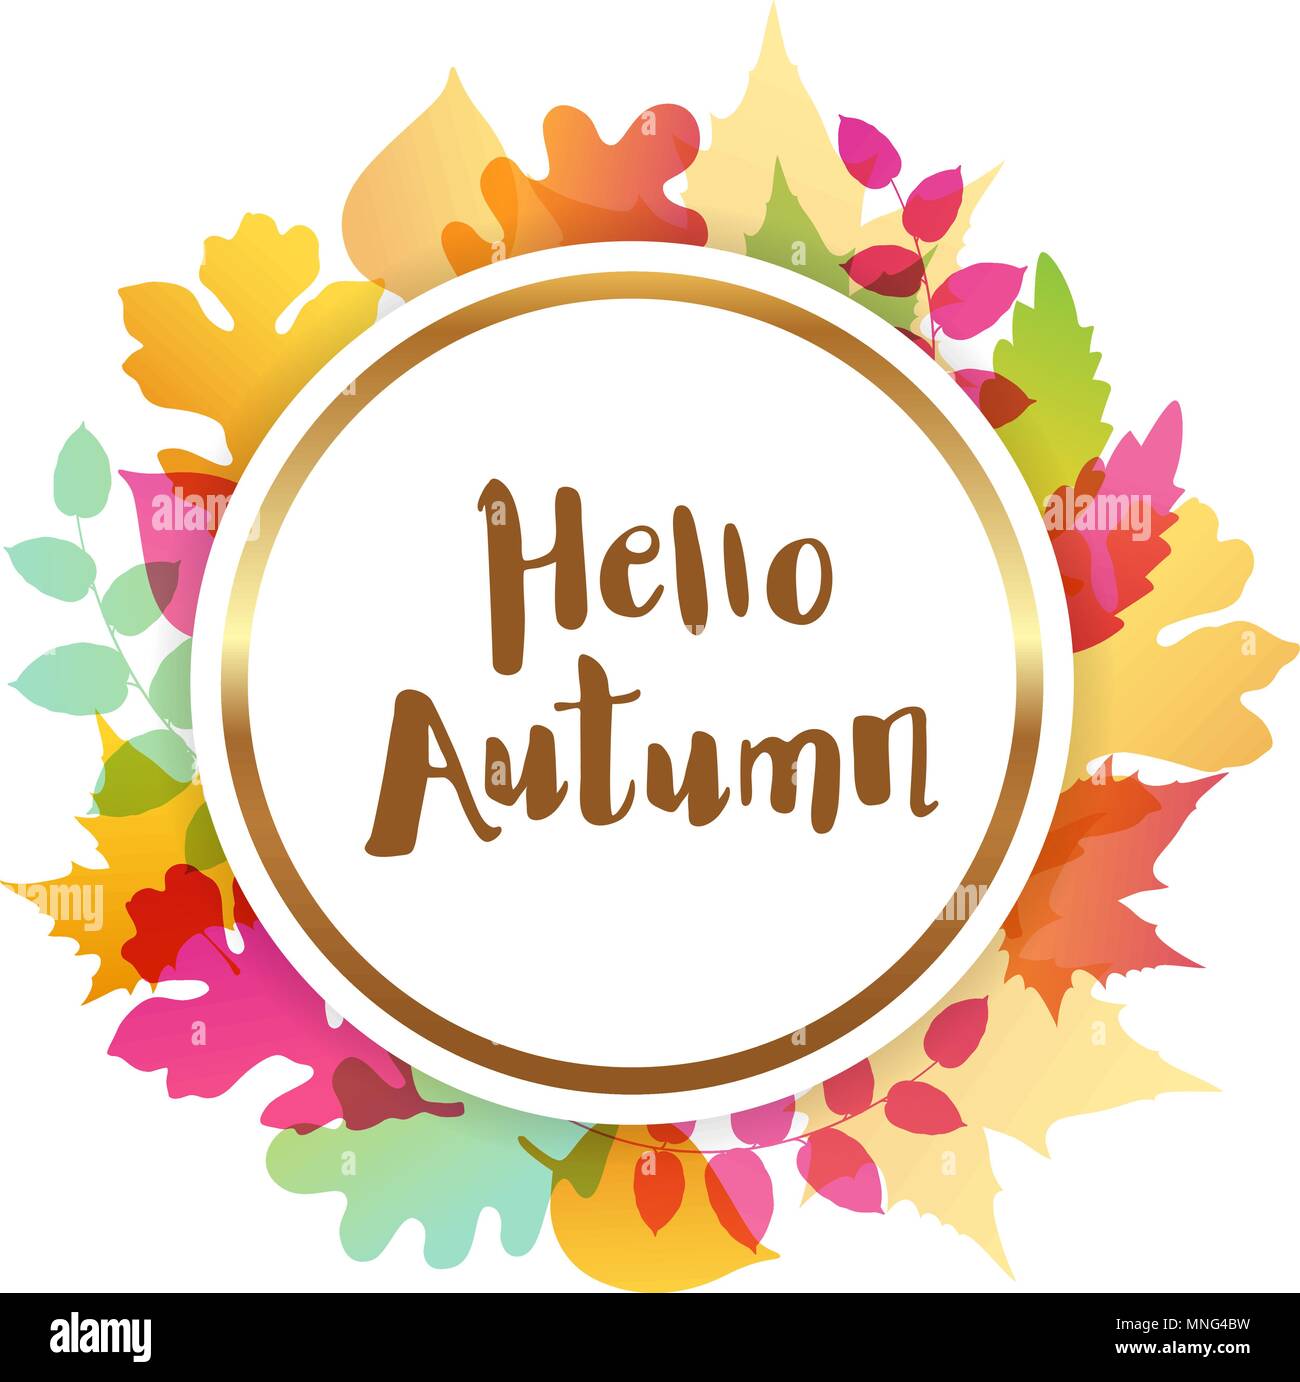 Bright abstract autumn banner with falling leaves. Hello autumn lettering. Stock Vector